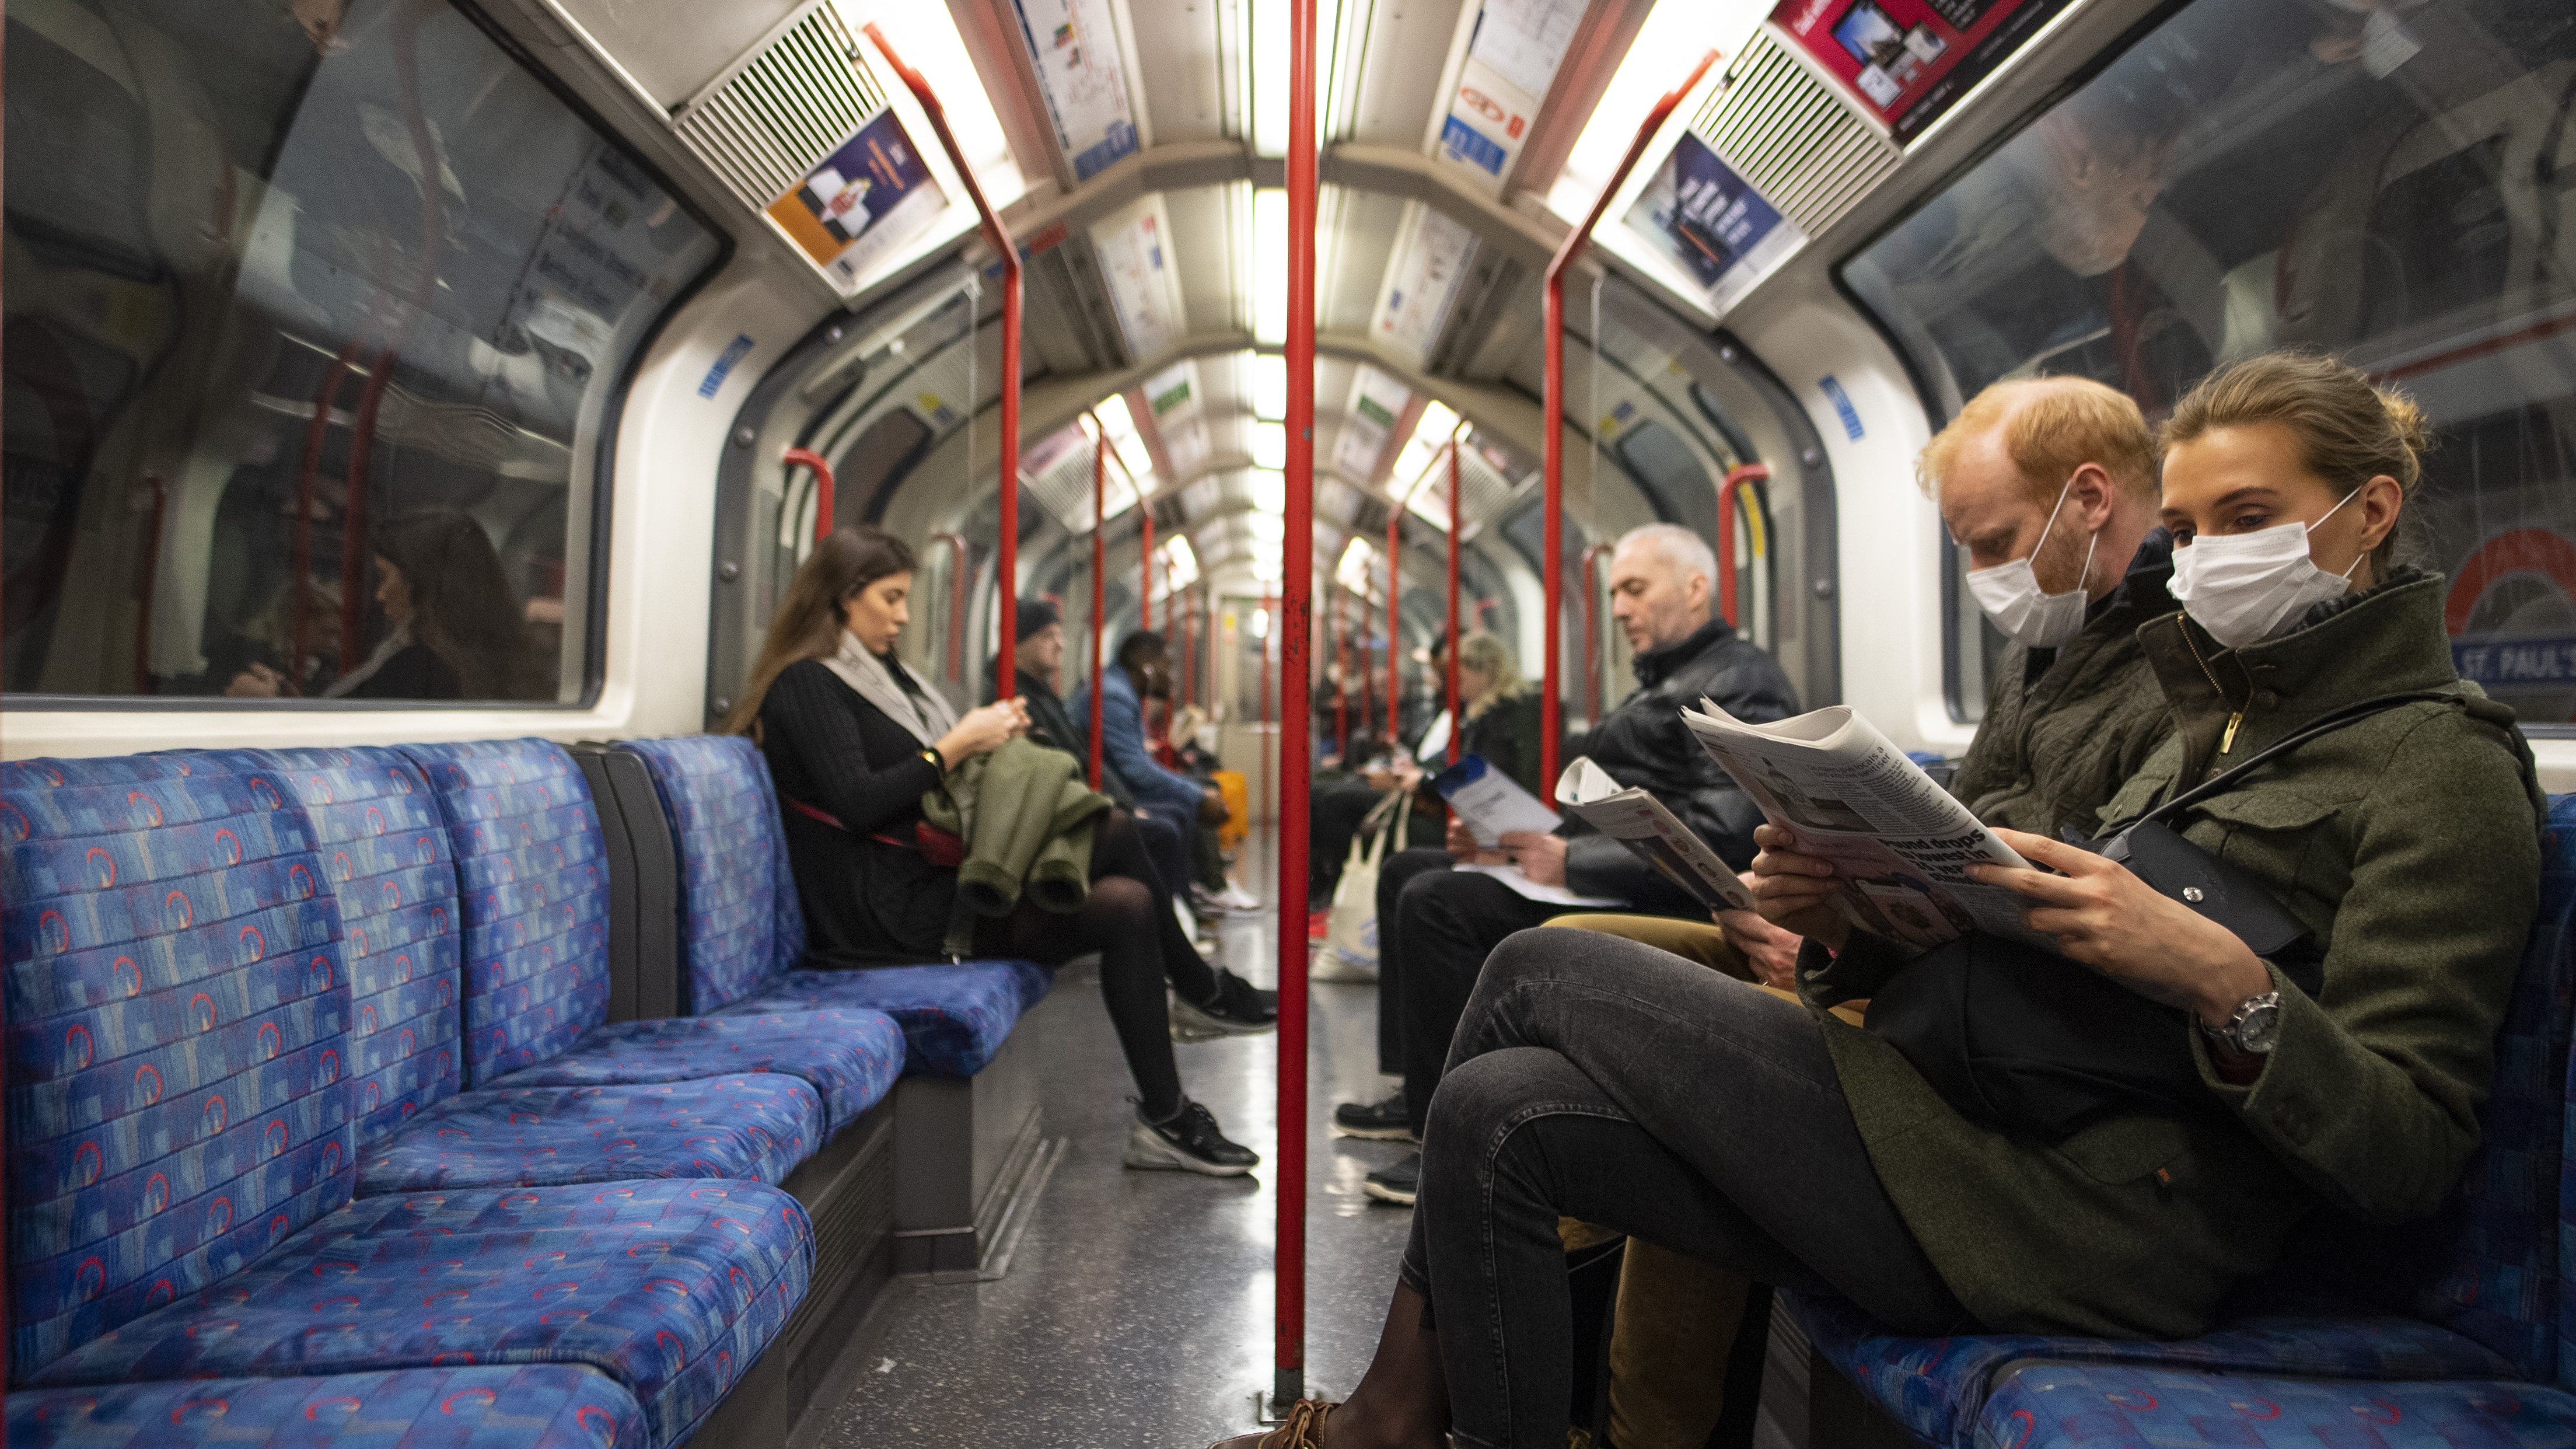 A couple sit on the Central Line Tube wearing protective face masks while reading a newspaper.